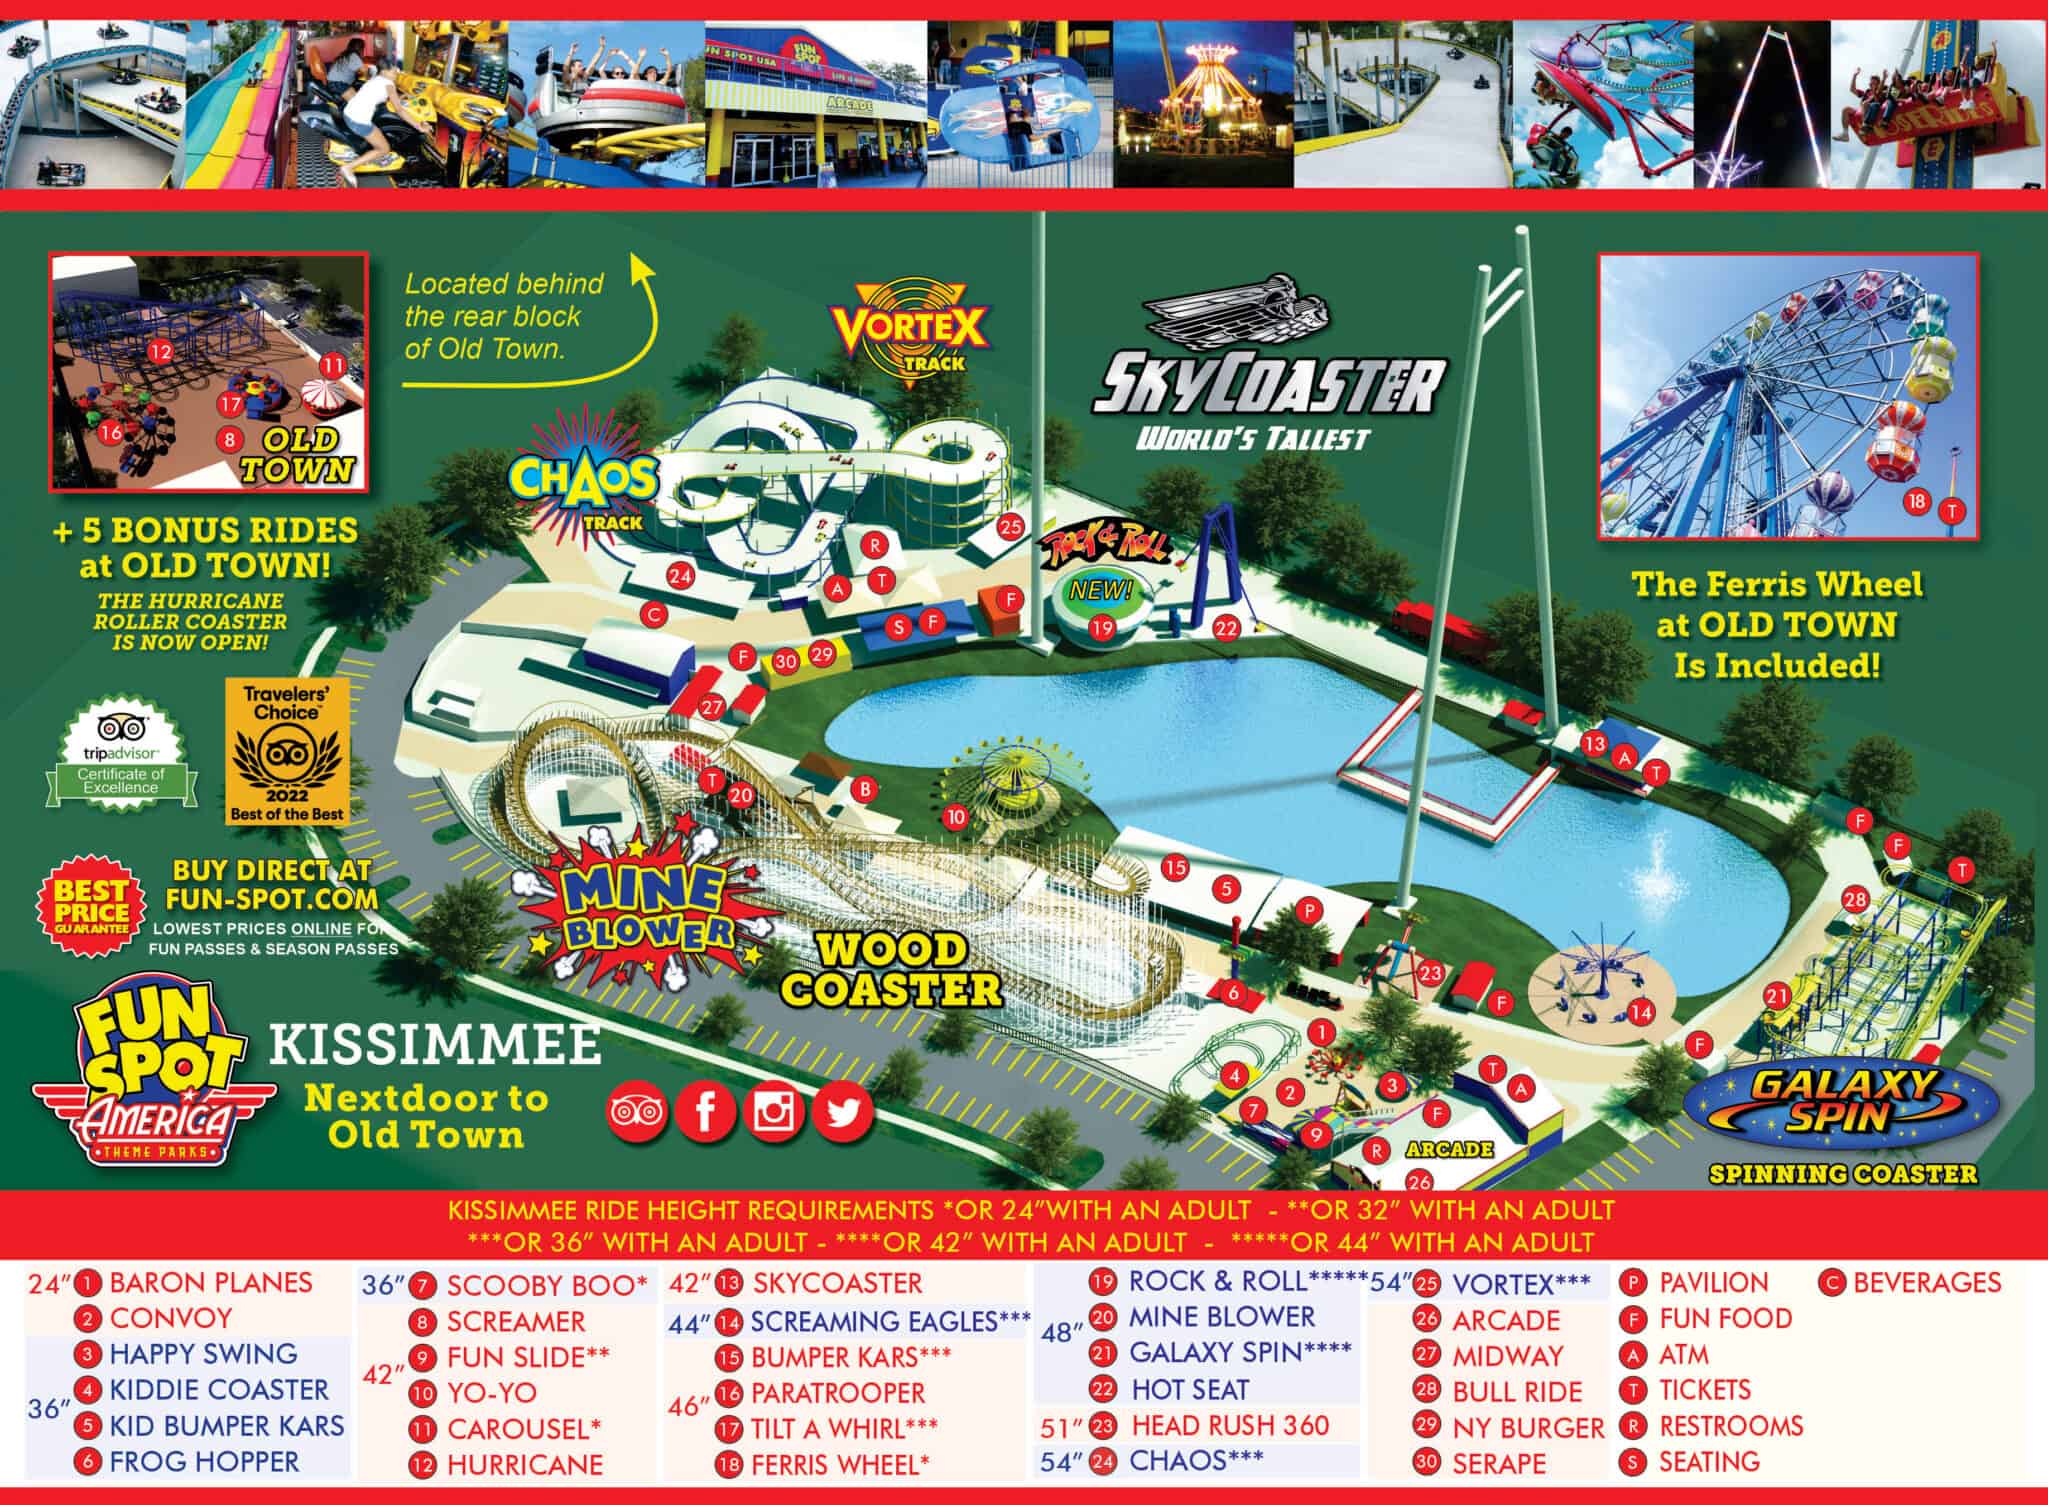 Kissimmee Hours & Directions | Fun Spot America